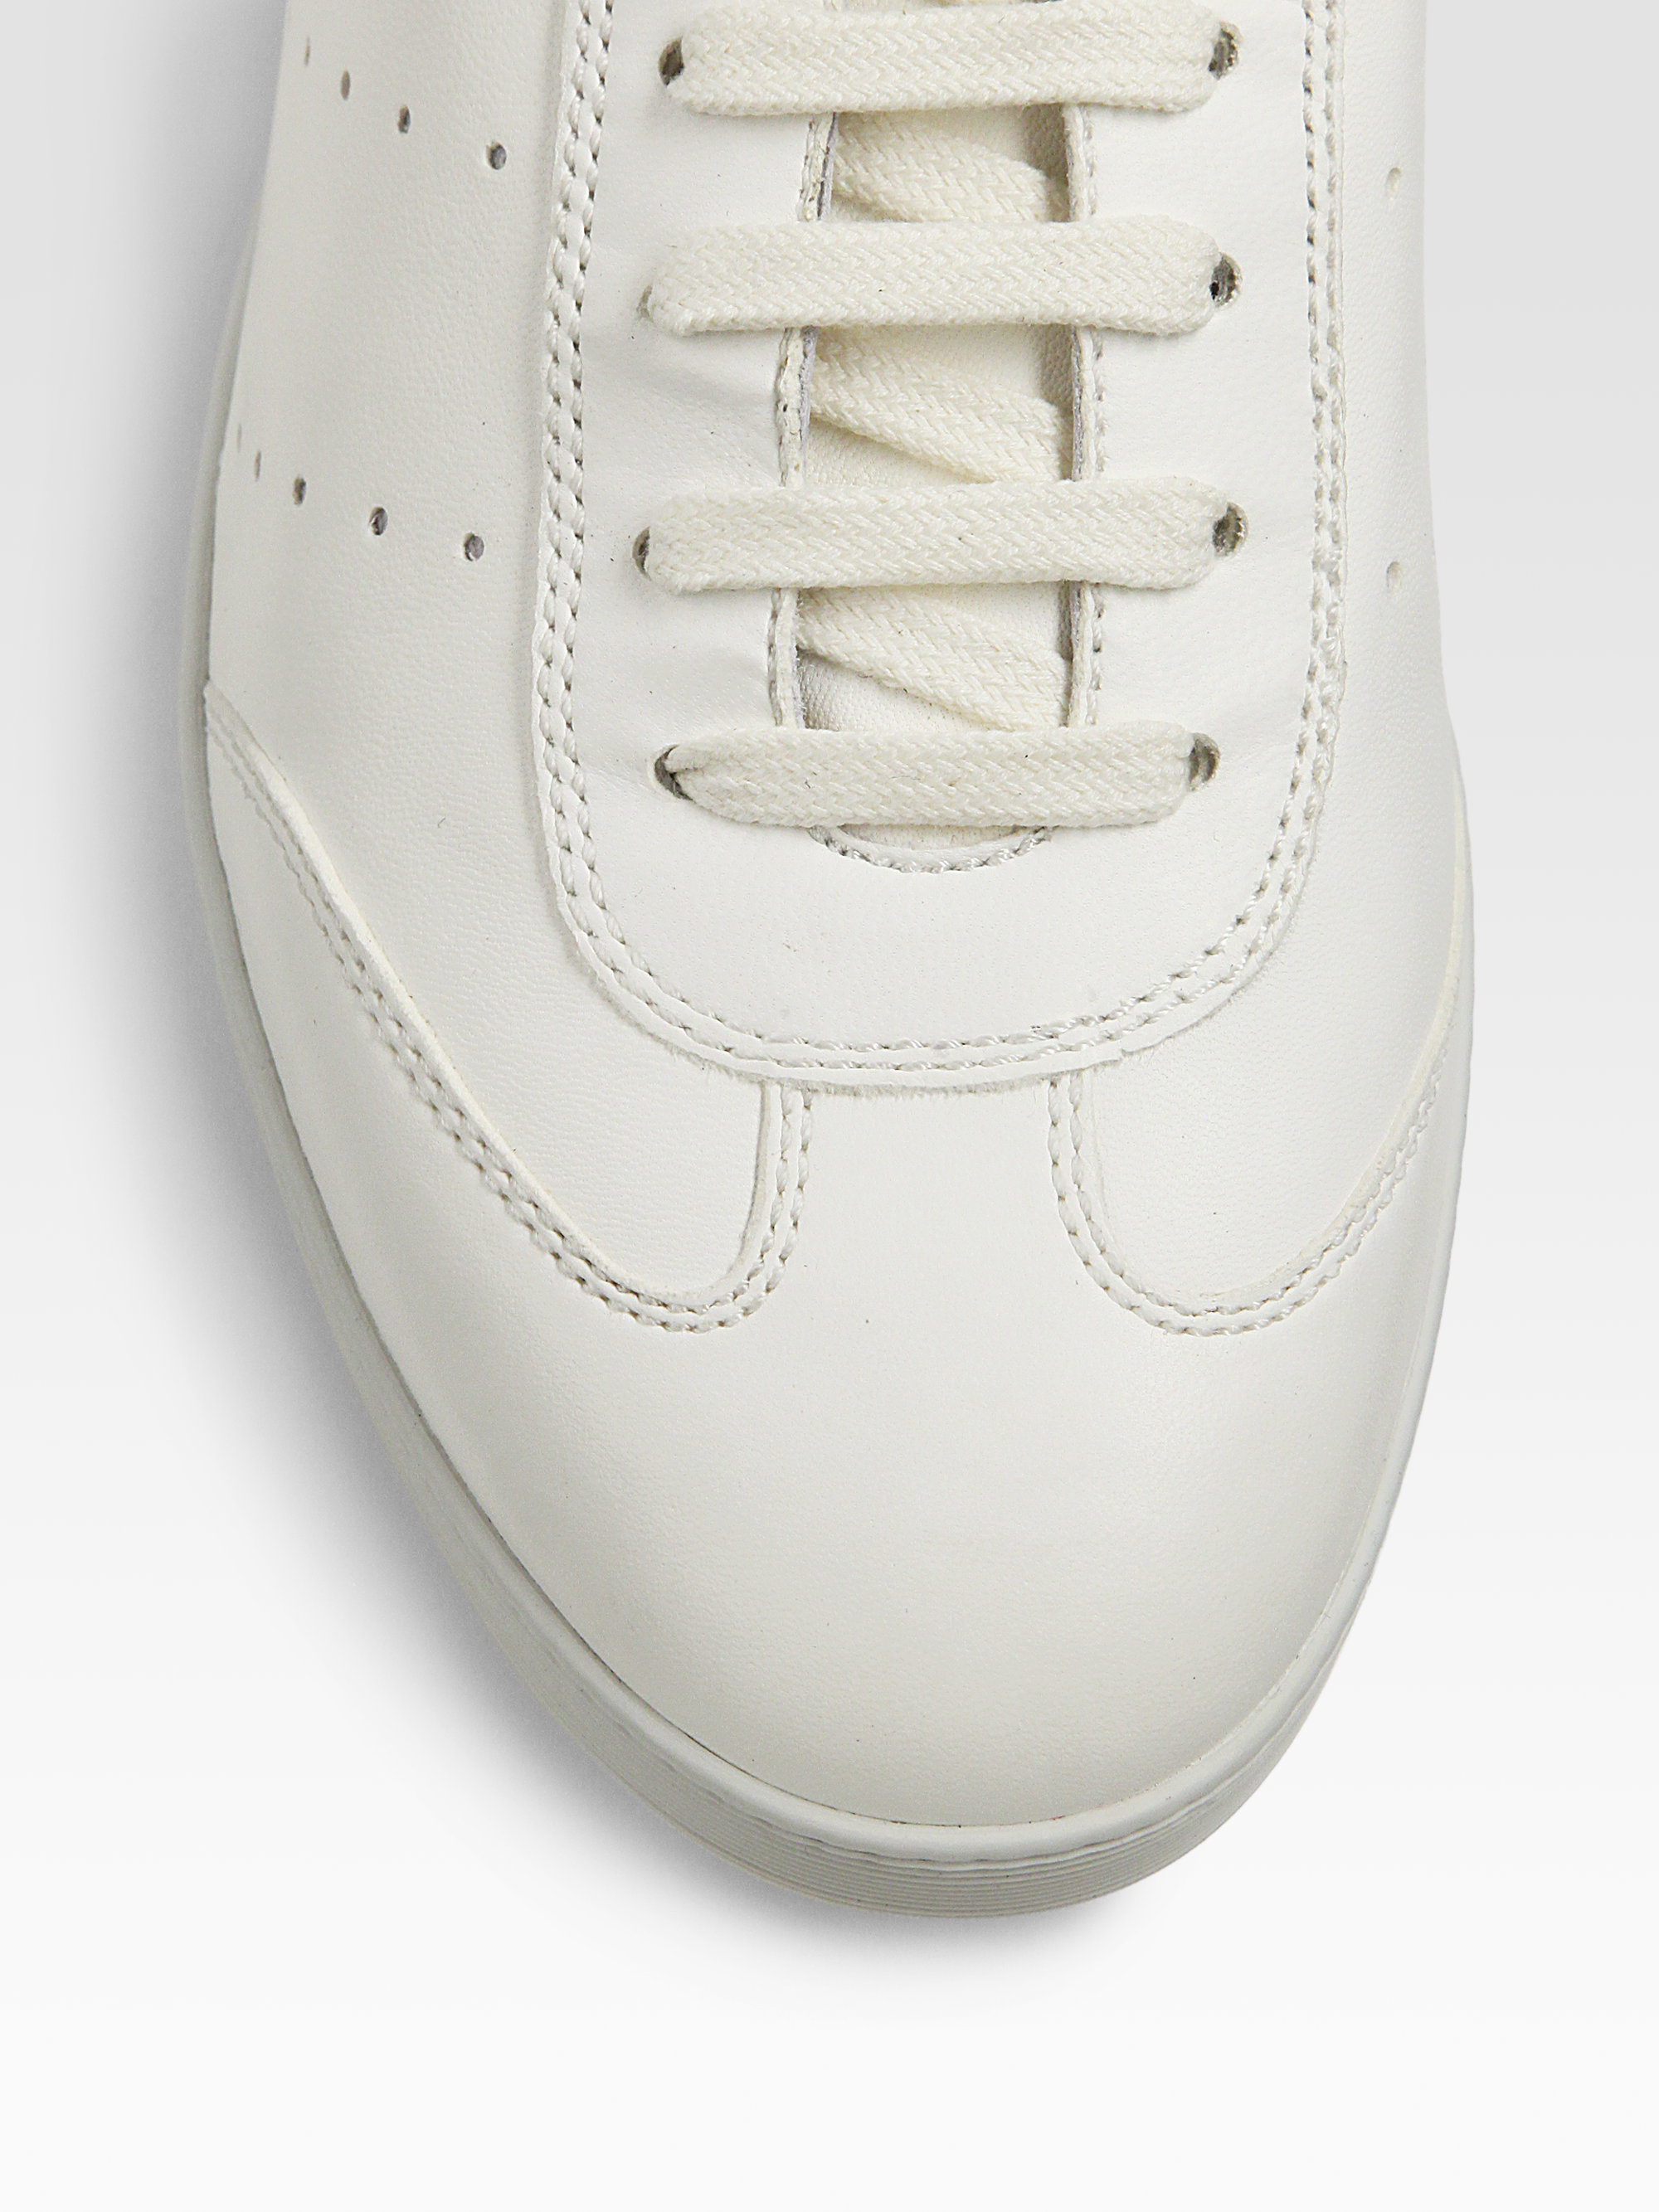 Moncler New Biarritz Leather Sneakers in White for Men - Lyst